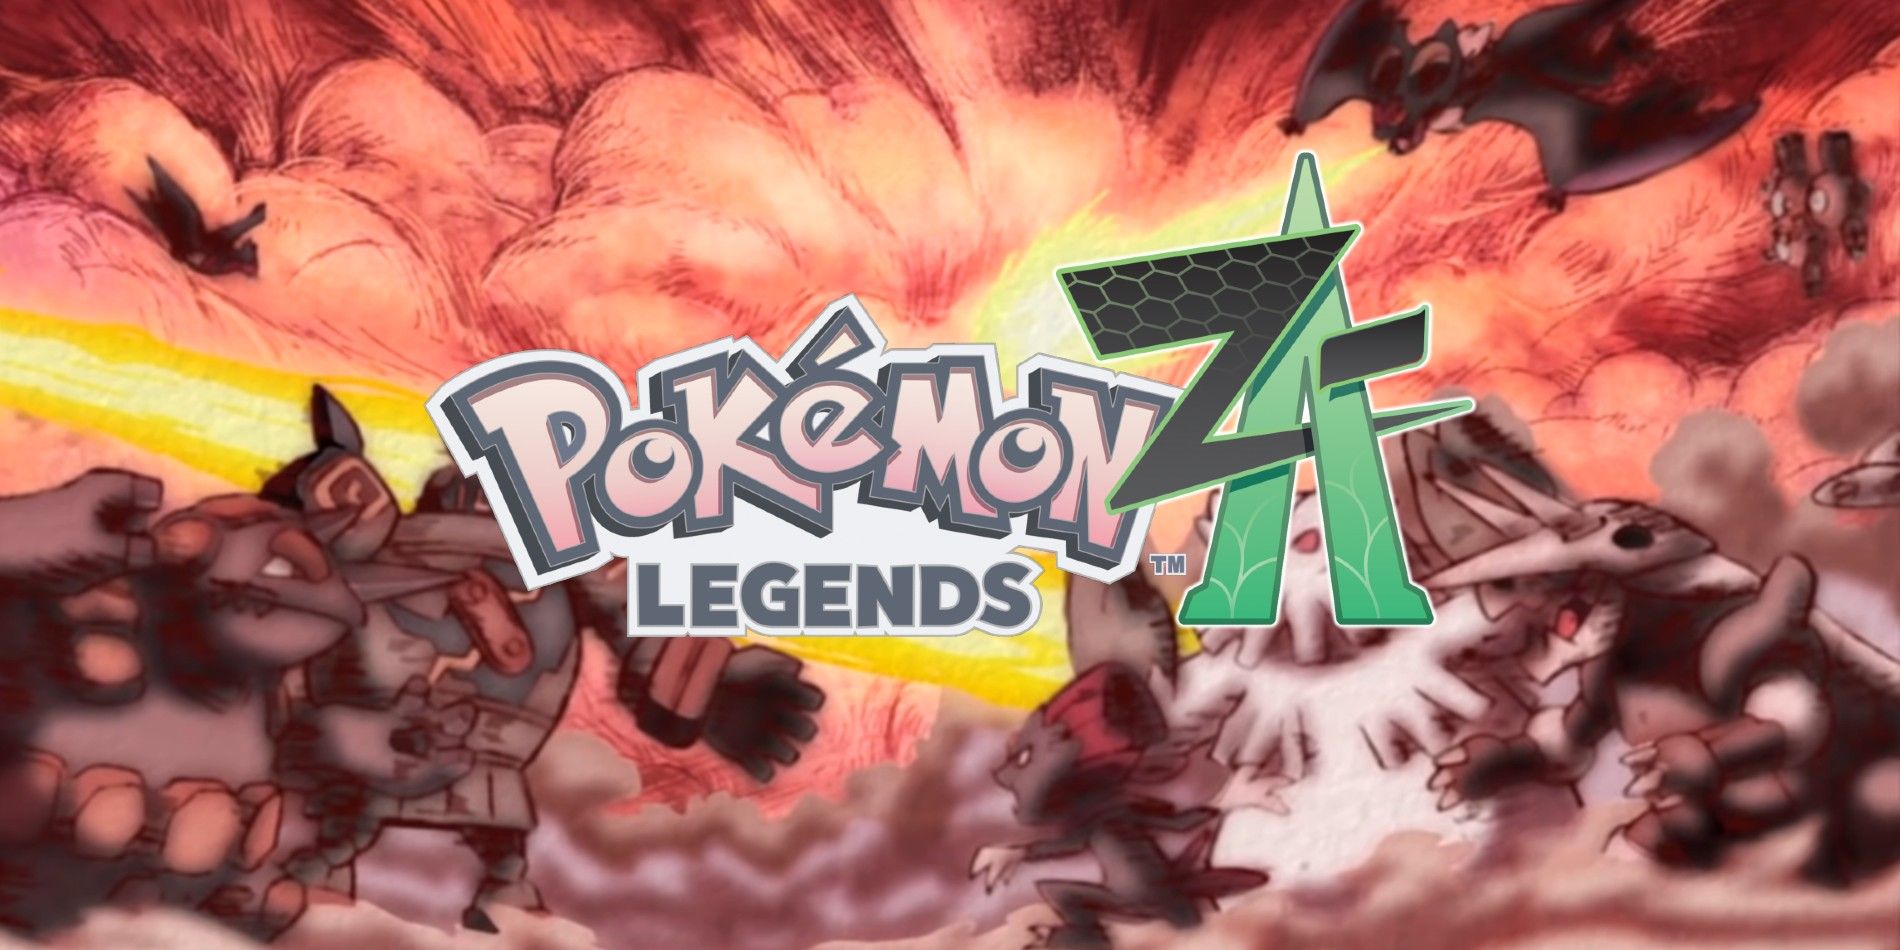 The logo for Pokémon Legends: Z-A with an illustration of Pokémon fighting in the ancient Kalos war in the background.